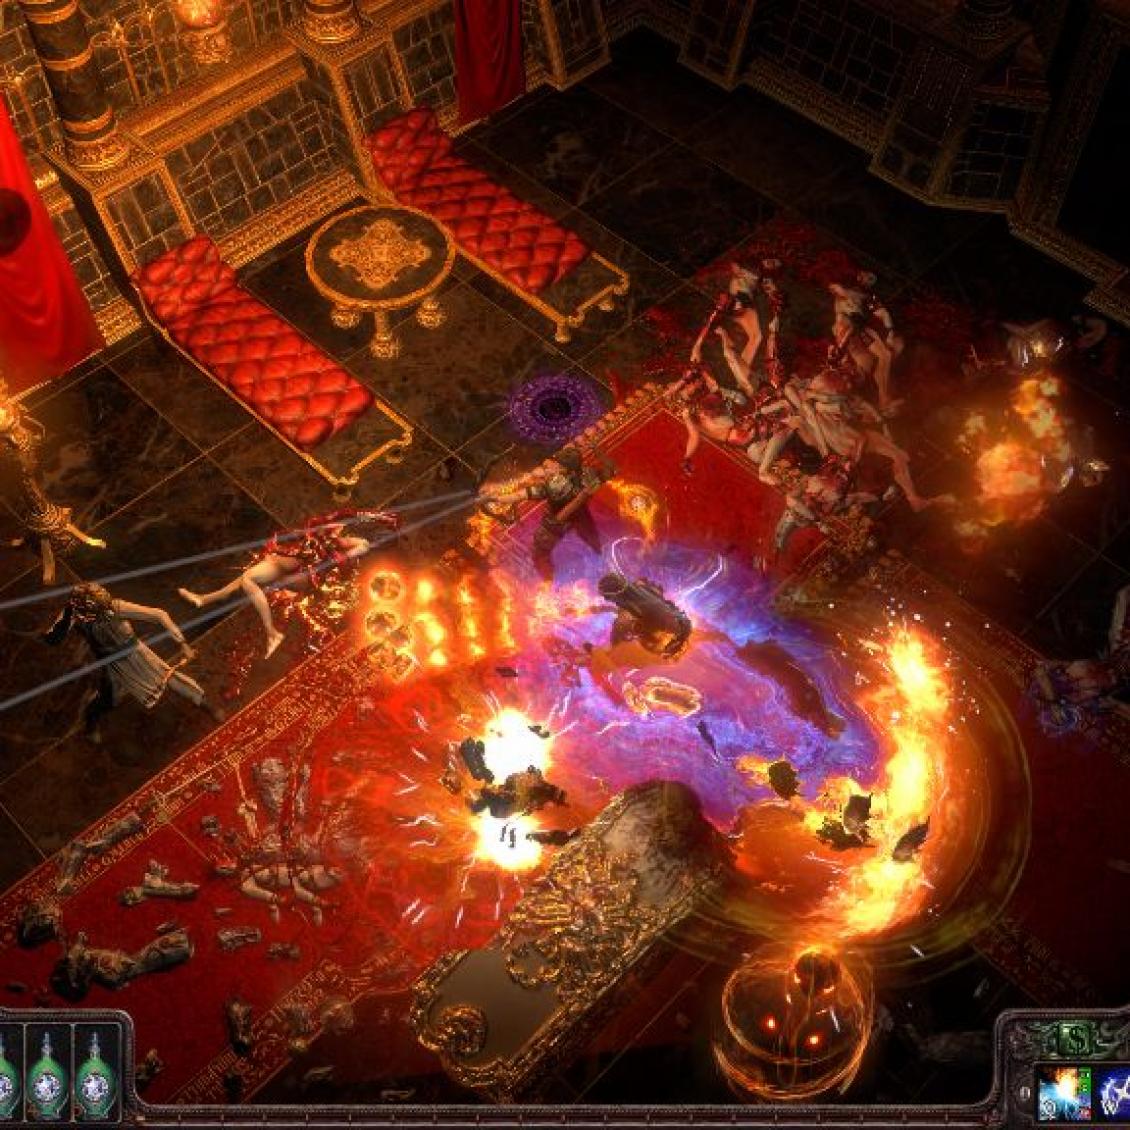 path of exile 2 delayed